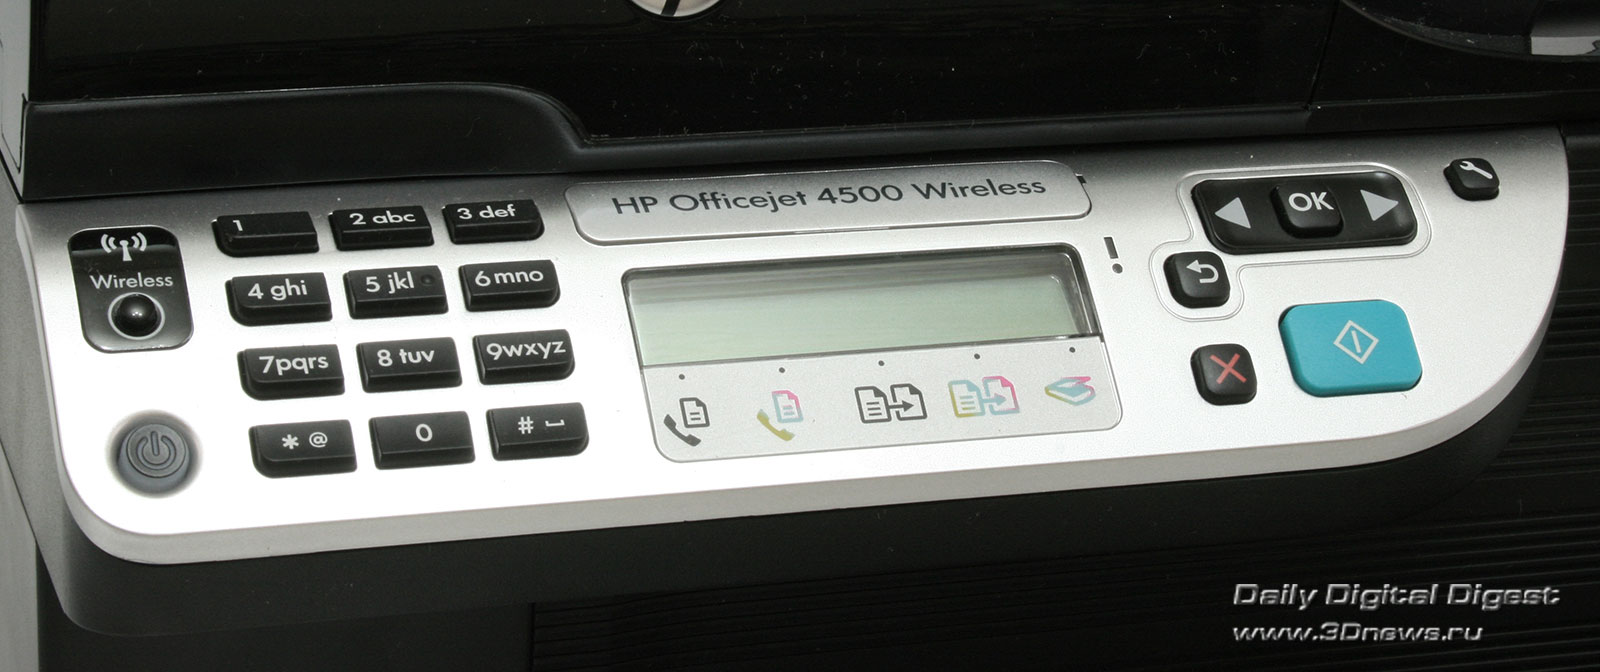 Hp Officejet 4500 G510a-F Driver Free Download For Windows ...